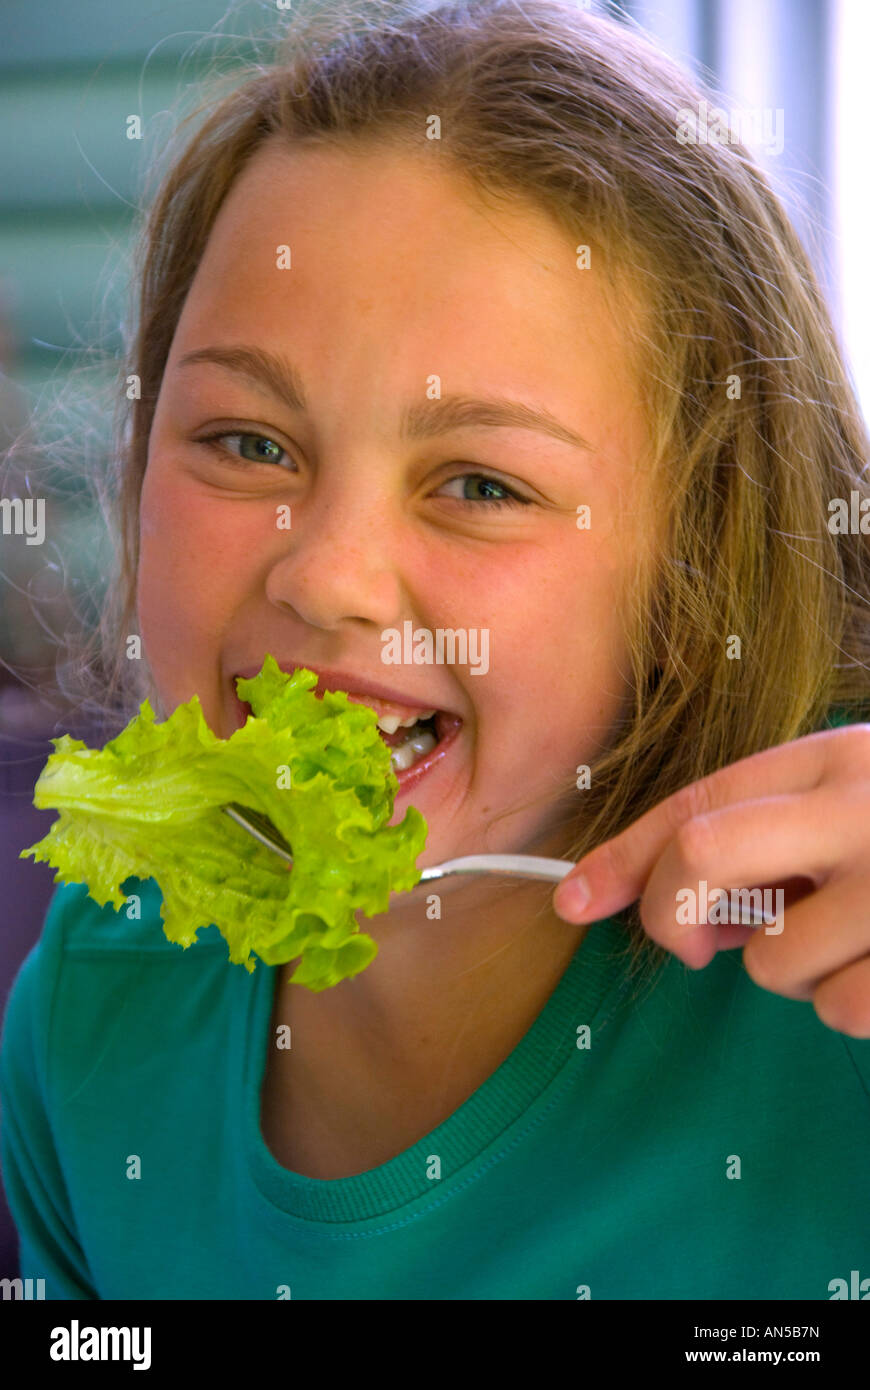 Pretty young girl eating lettuce from a fork Stock Photo